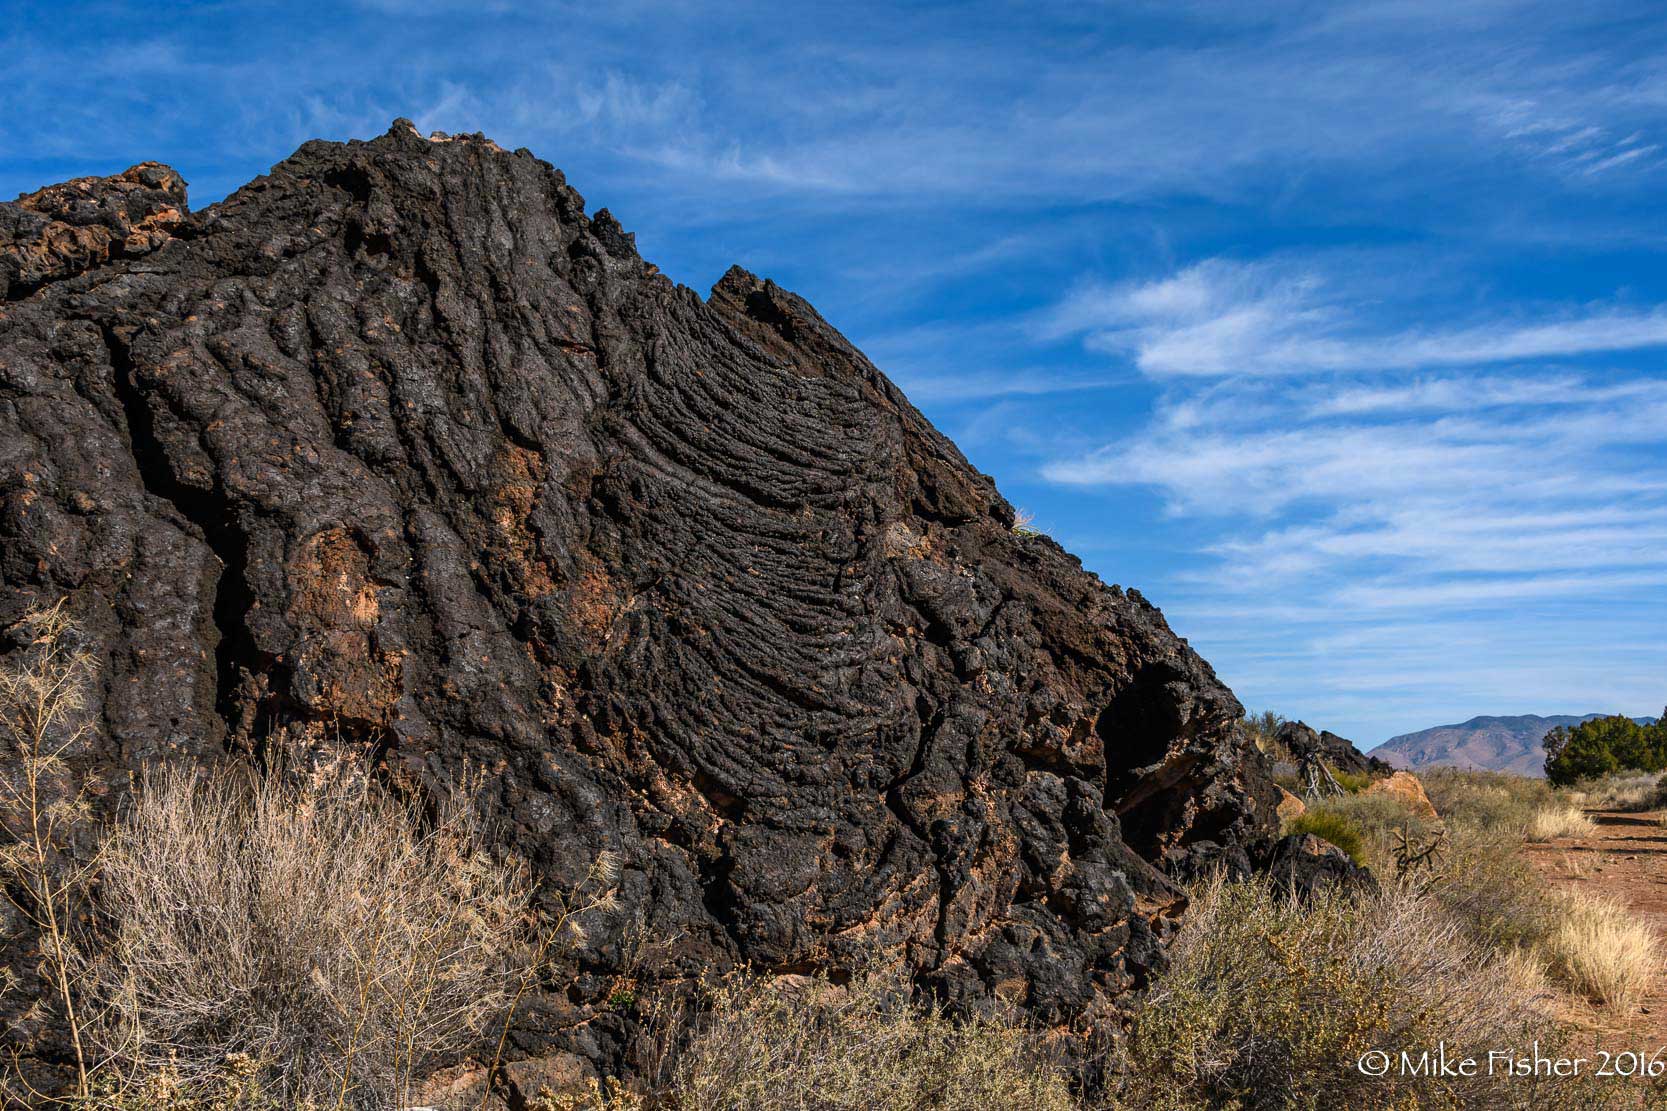 Photograph of basalt rocks at the Valley of Fires in New Mexico.